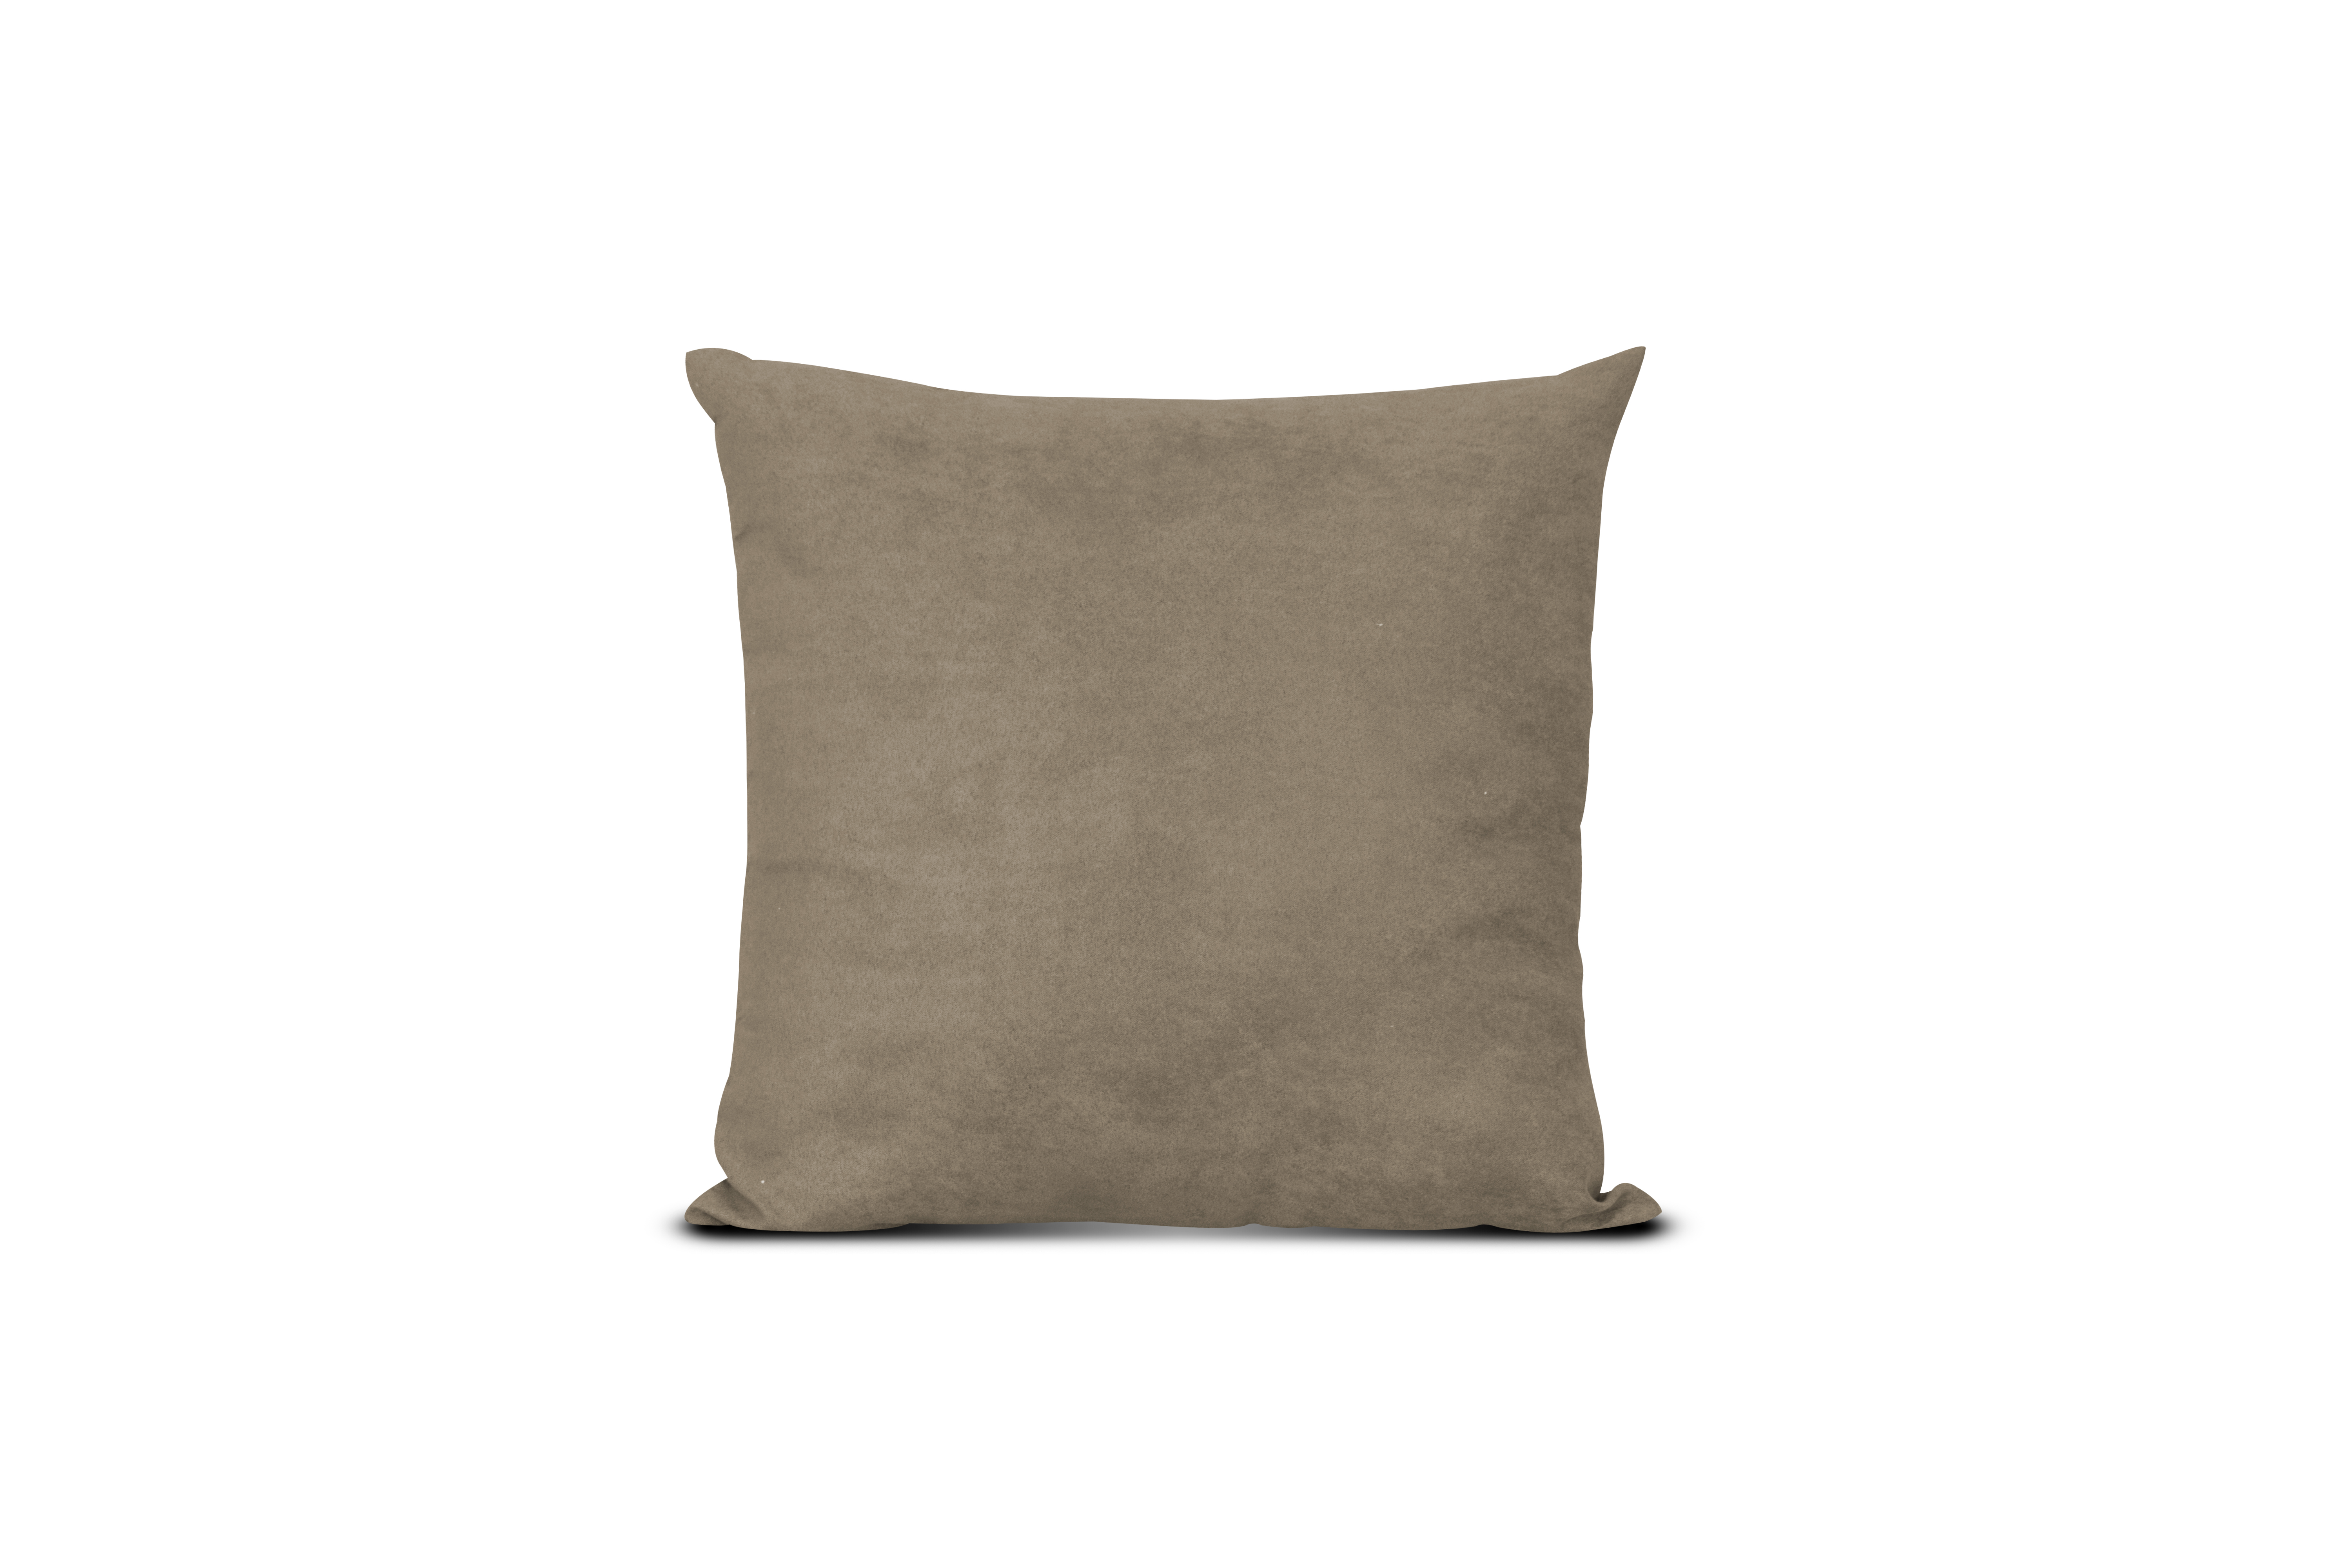 PREMIER CUSHION SUEDE 40X40CM TAUPE WITHOUT ZIP